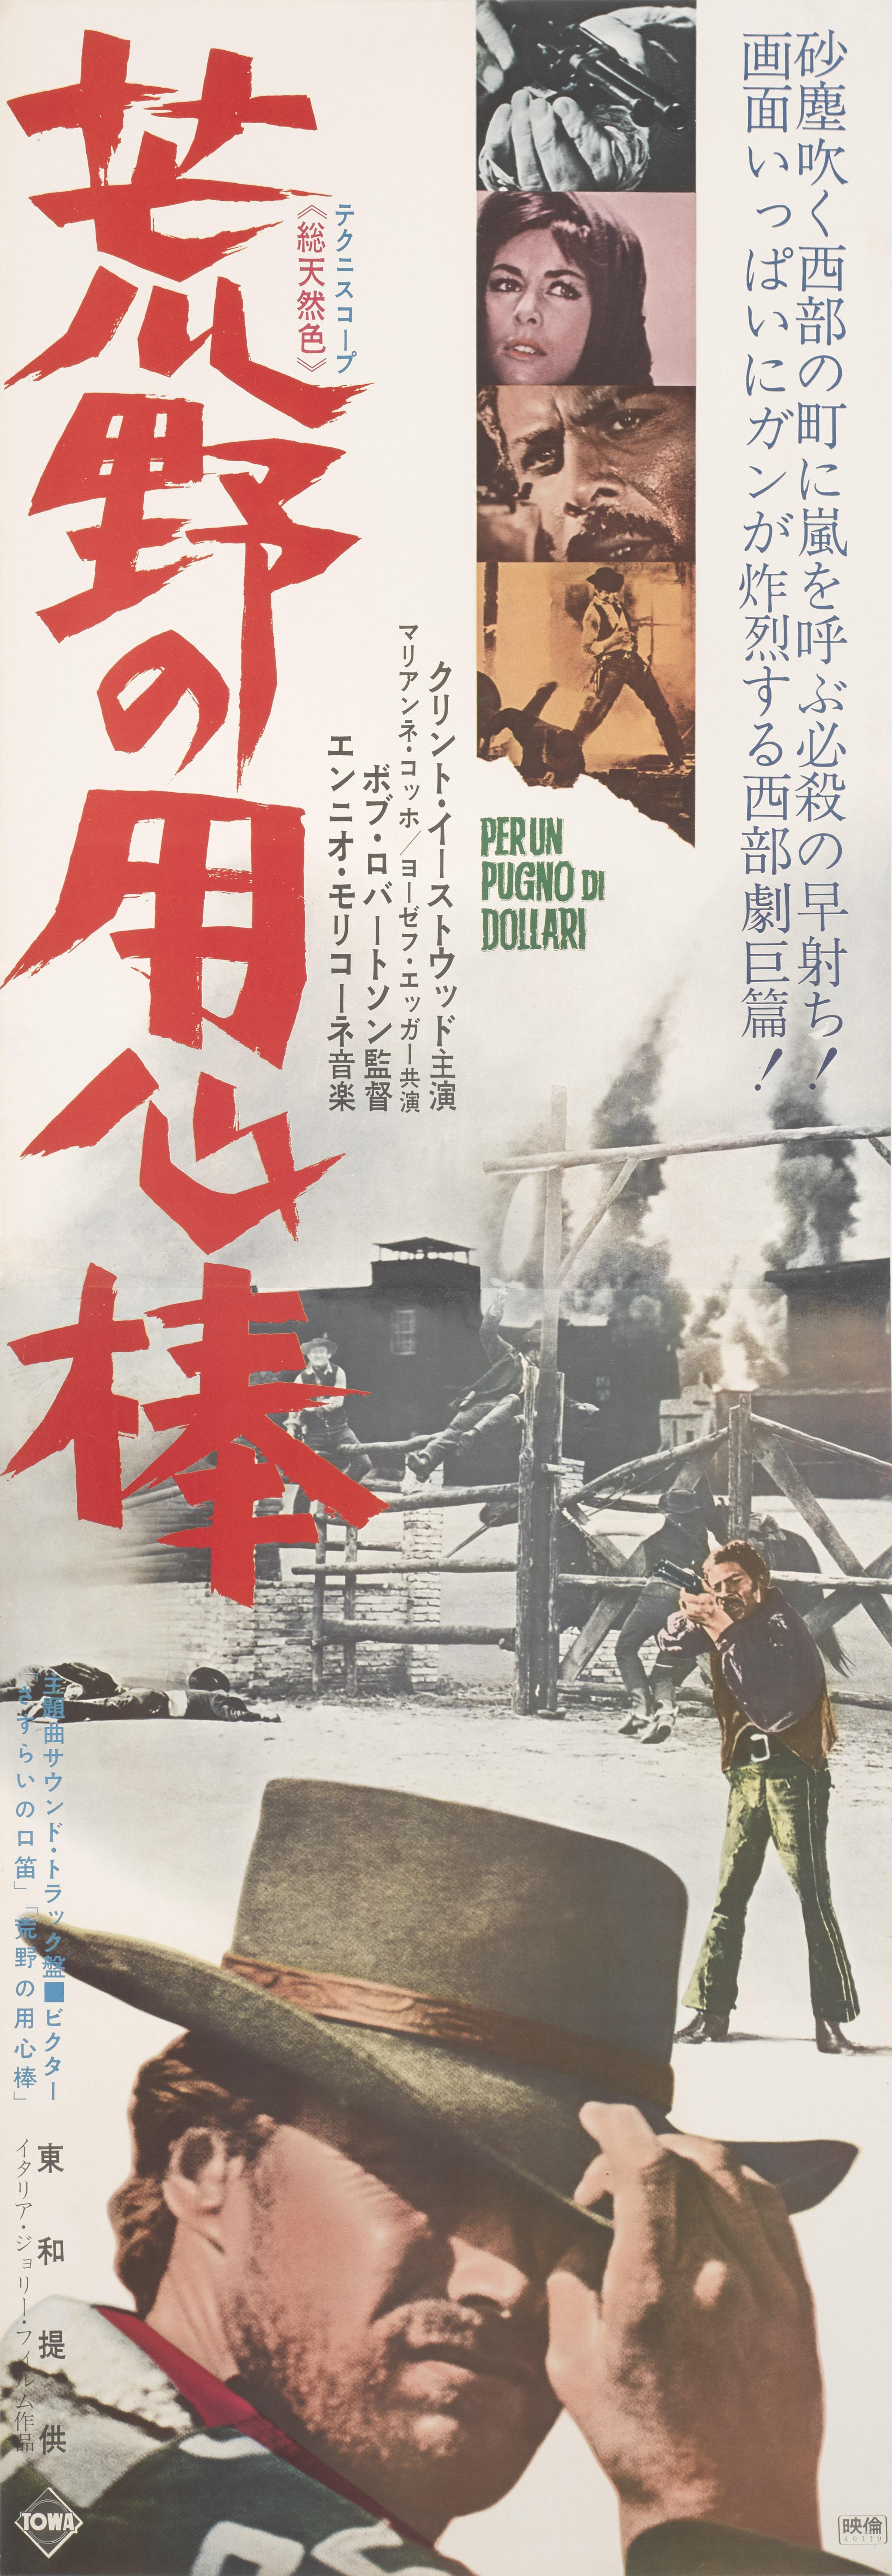 Original Japanese film poster for Fistful of Dollars 1964.
This film was a remake of Akira Kurosawa's 1961 film Yojimbo. This film launched the dollar trilogy and establishing Sergio Leone and Clint Eastwood's careers.
This is the rarer double